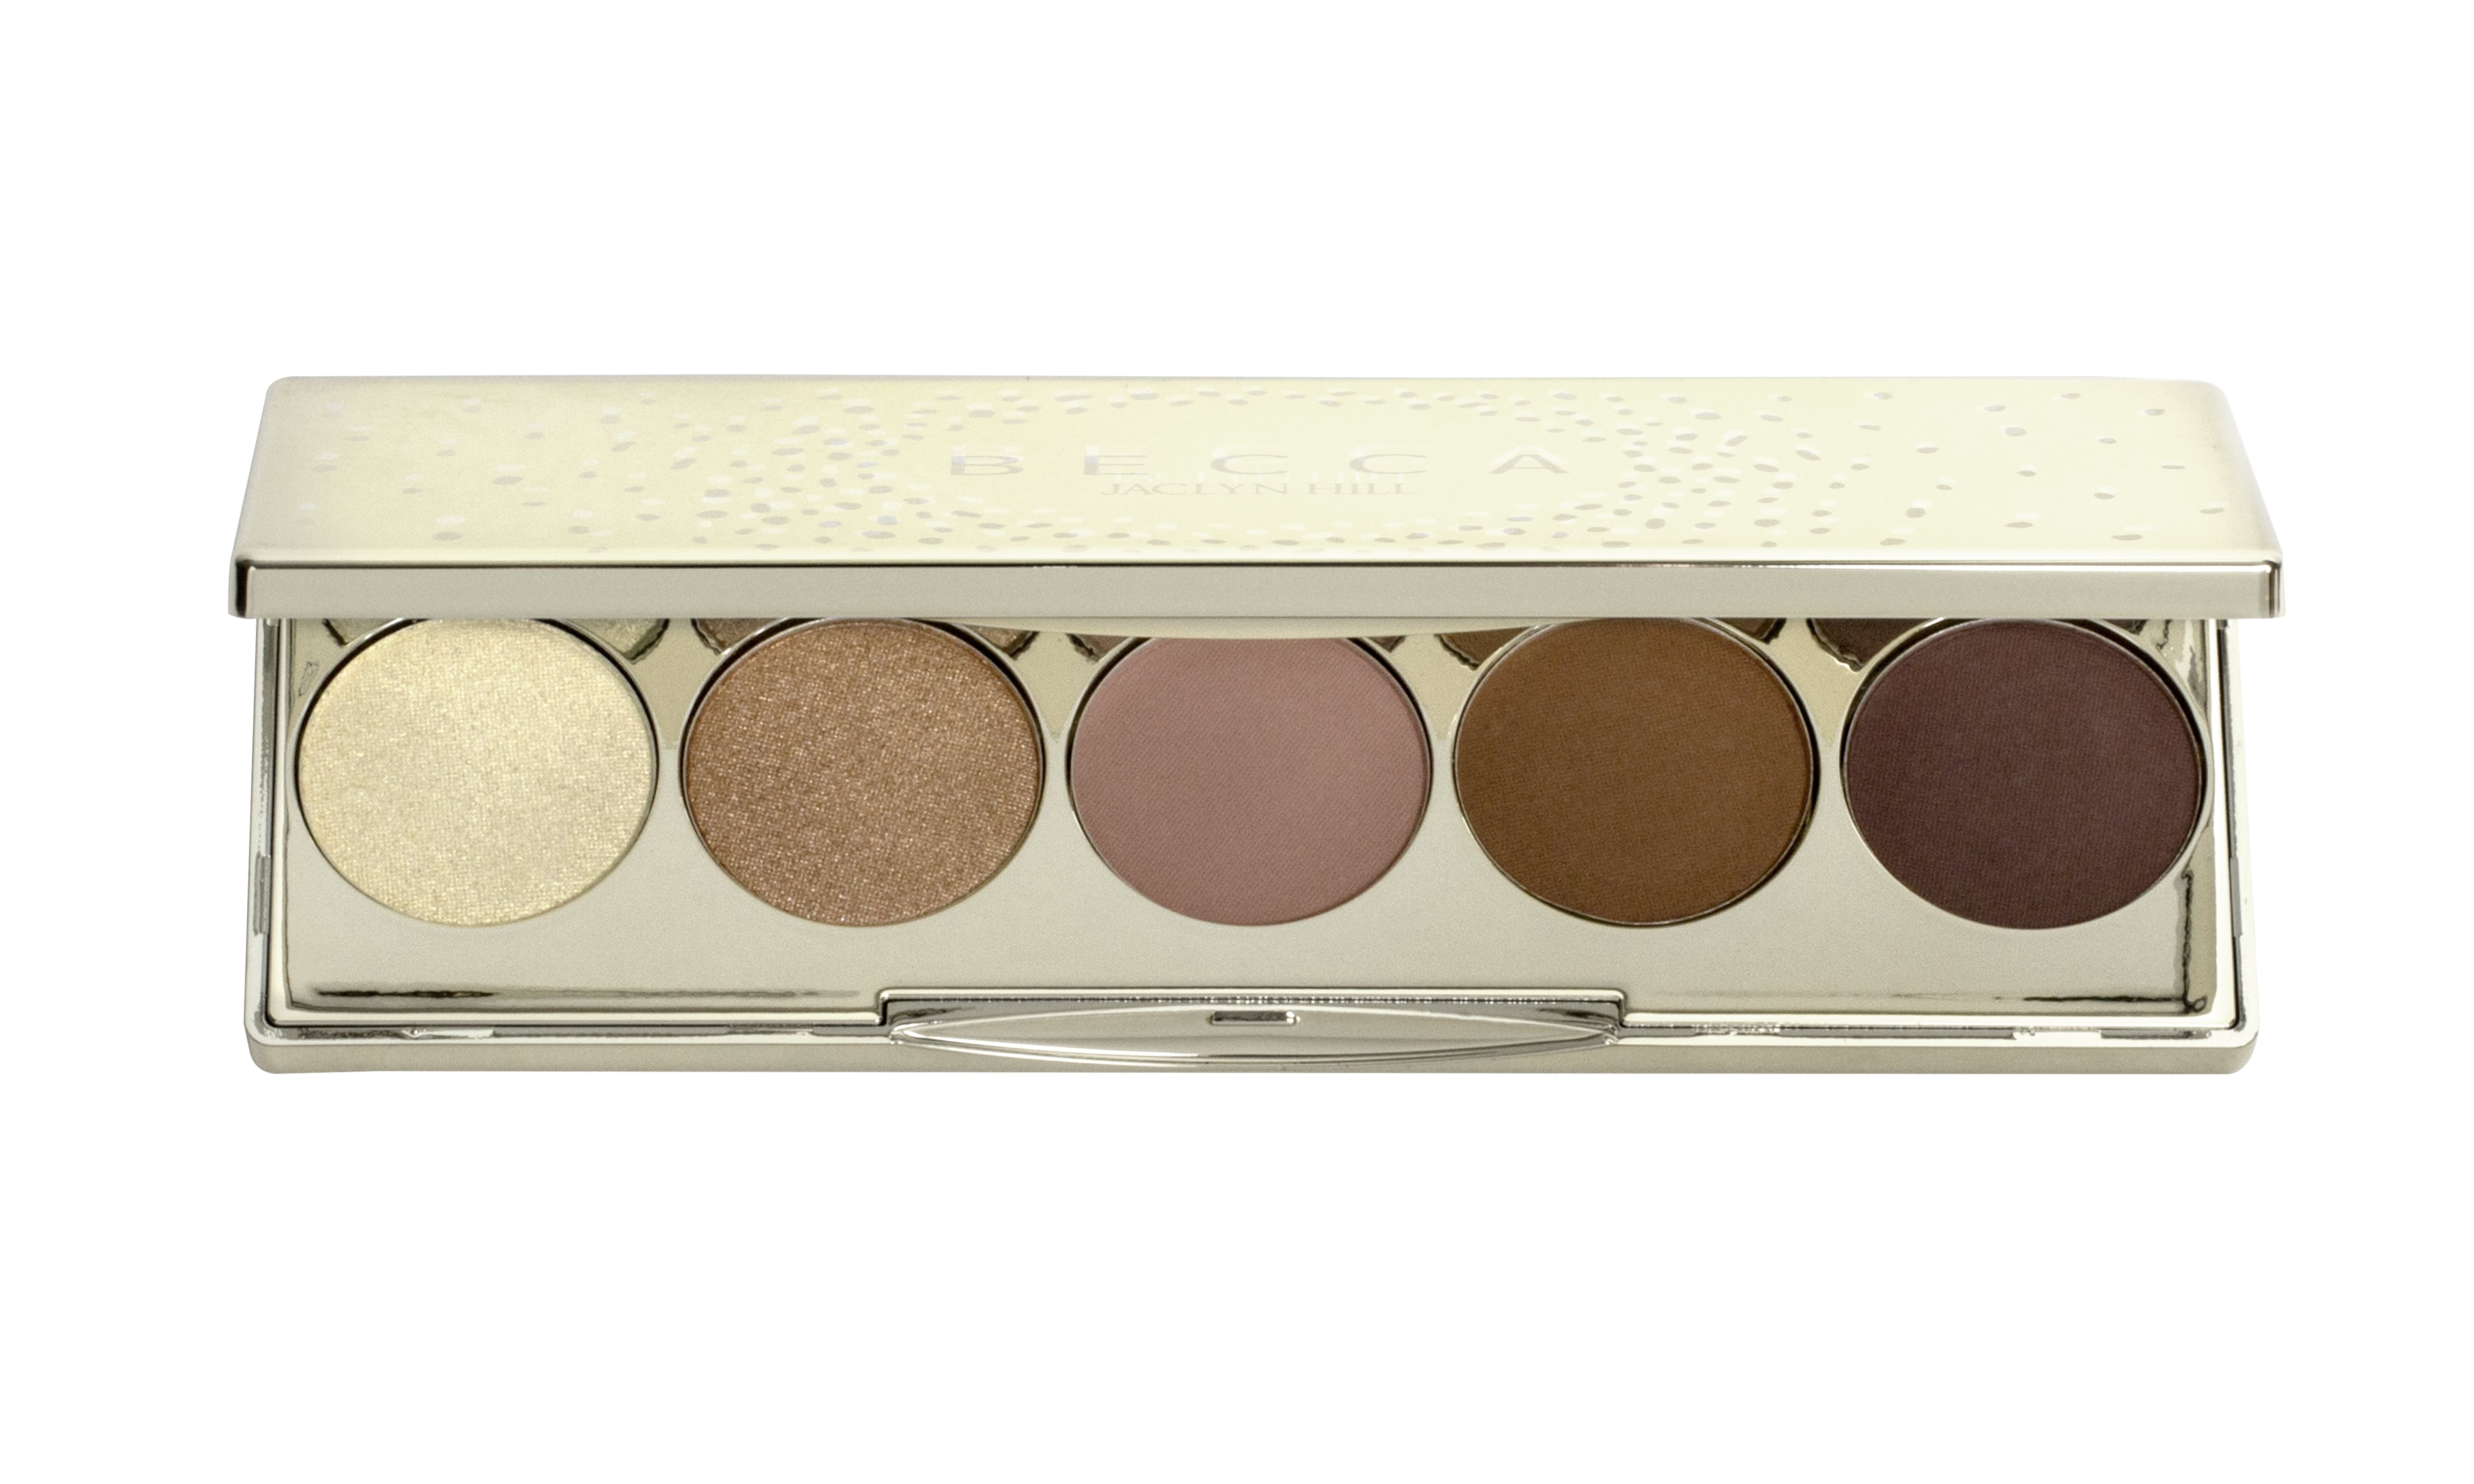 Becca x Jaclyn Hill Palette: Is It All Hype or Nah? —